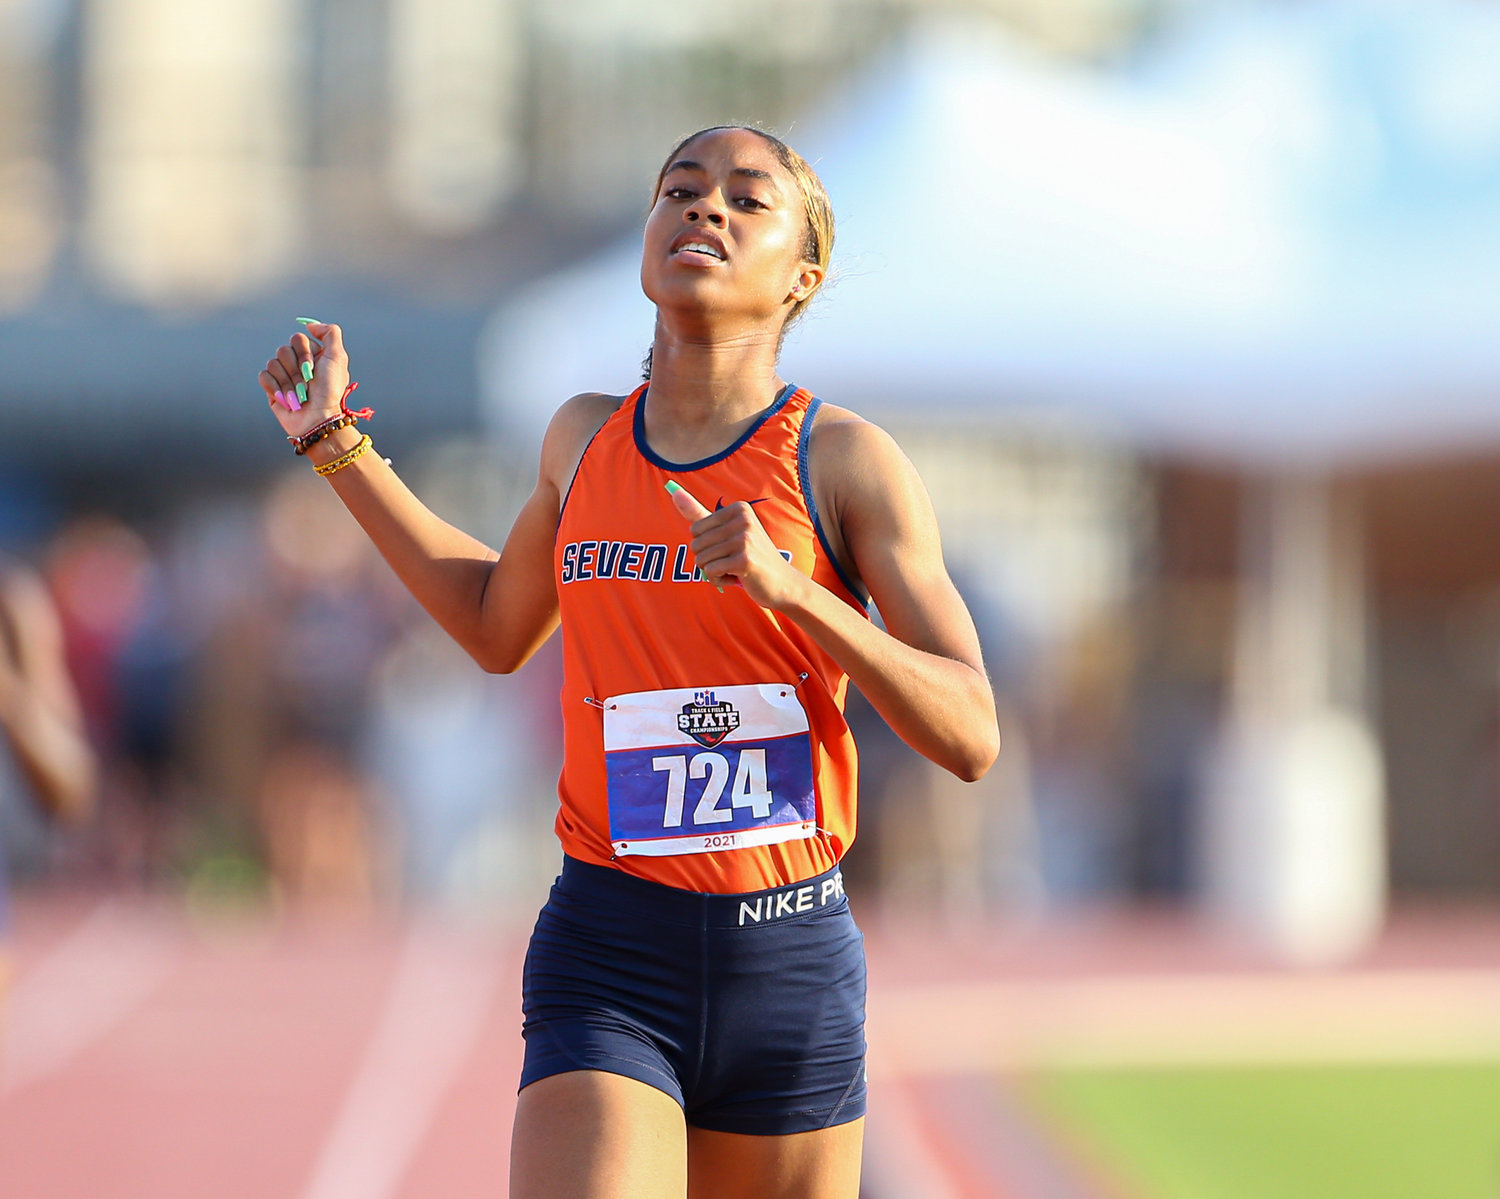 Haley Tate of Seven Lakes High School runs in the Class 6A girls 400-meter dash at the UIL State Track and Field Meet on May 8, 2021 at Mike A. Myers Stadium in Austin, Texas.